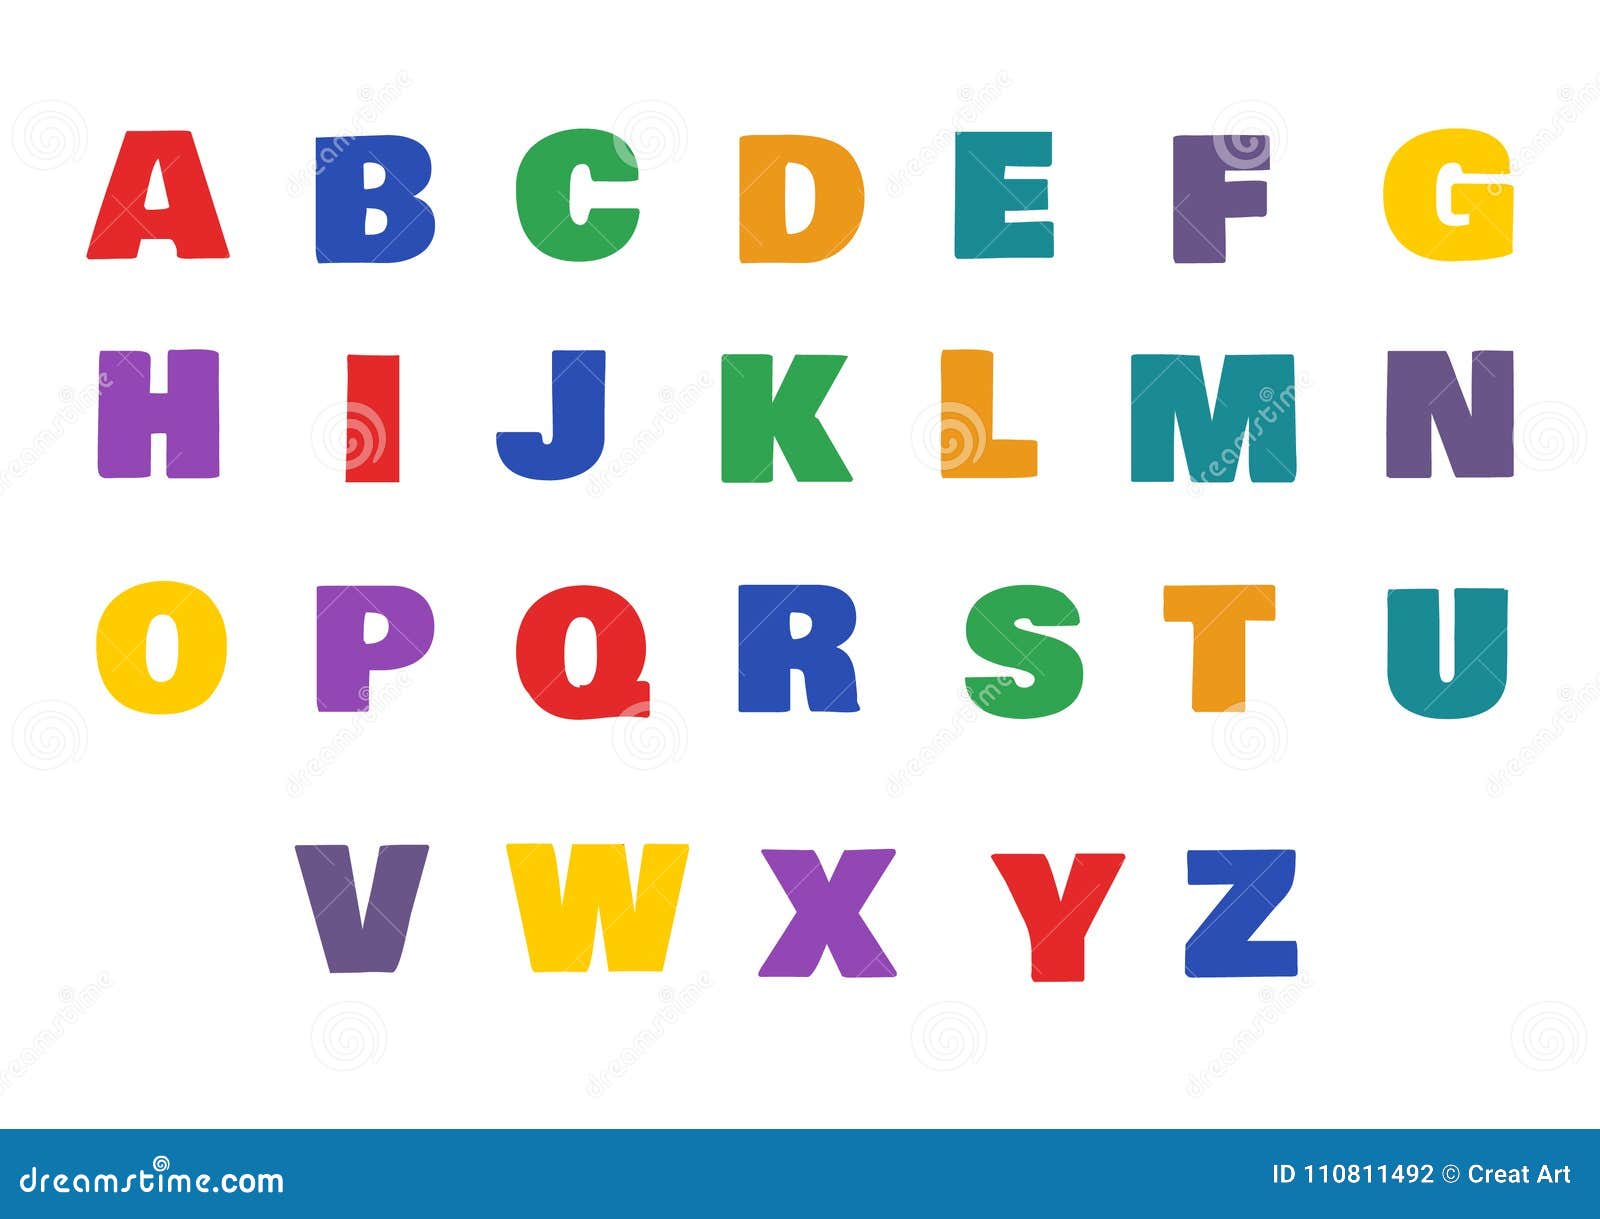 Alphabet Letter Pictures  Display Posters (Teacher-Made)